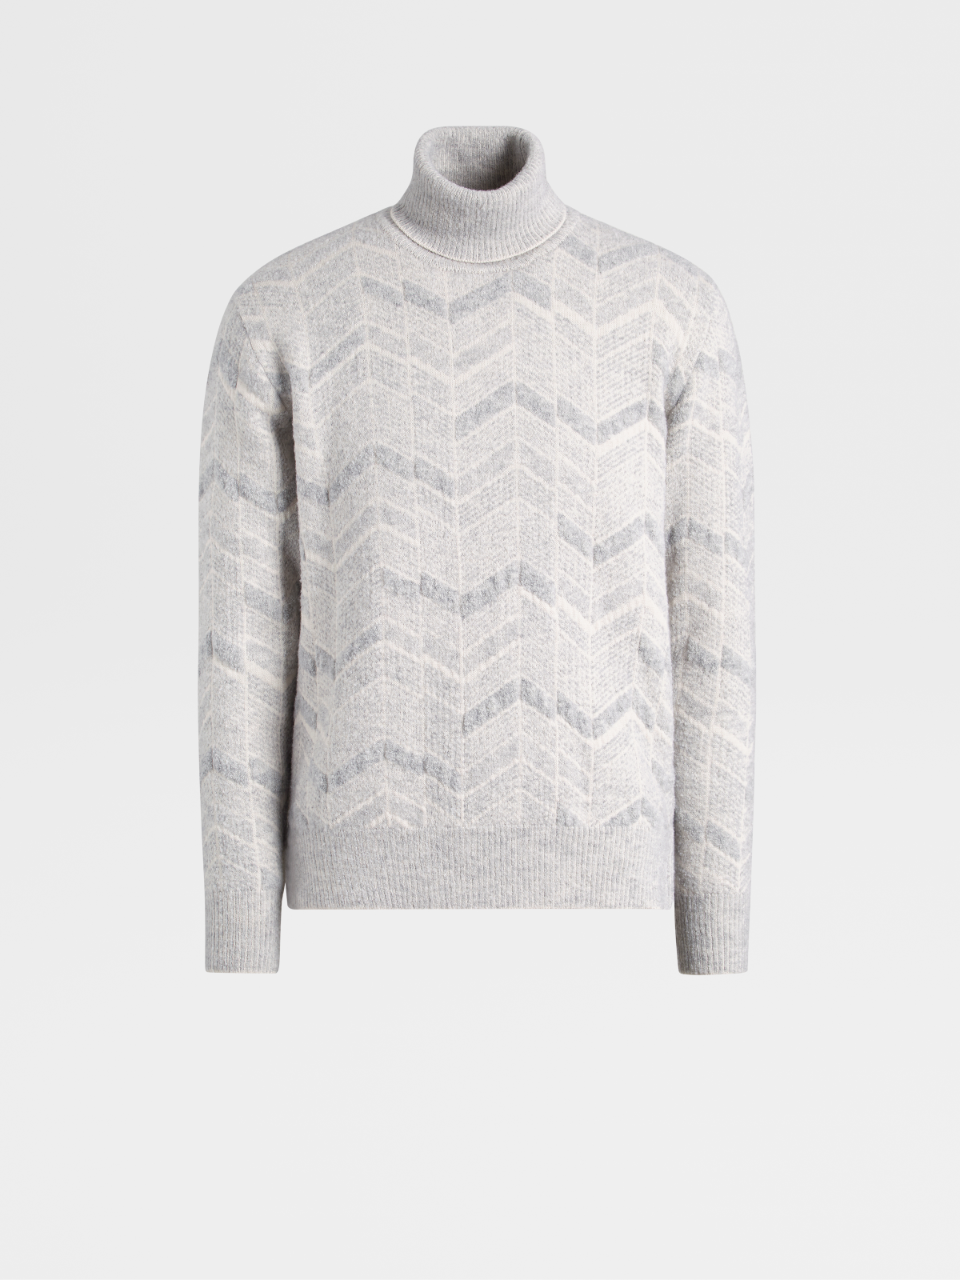 Cashmere Silk and Wool Knit Turtleneck